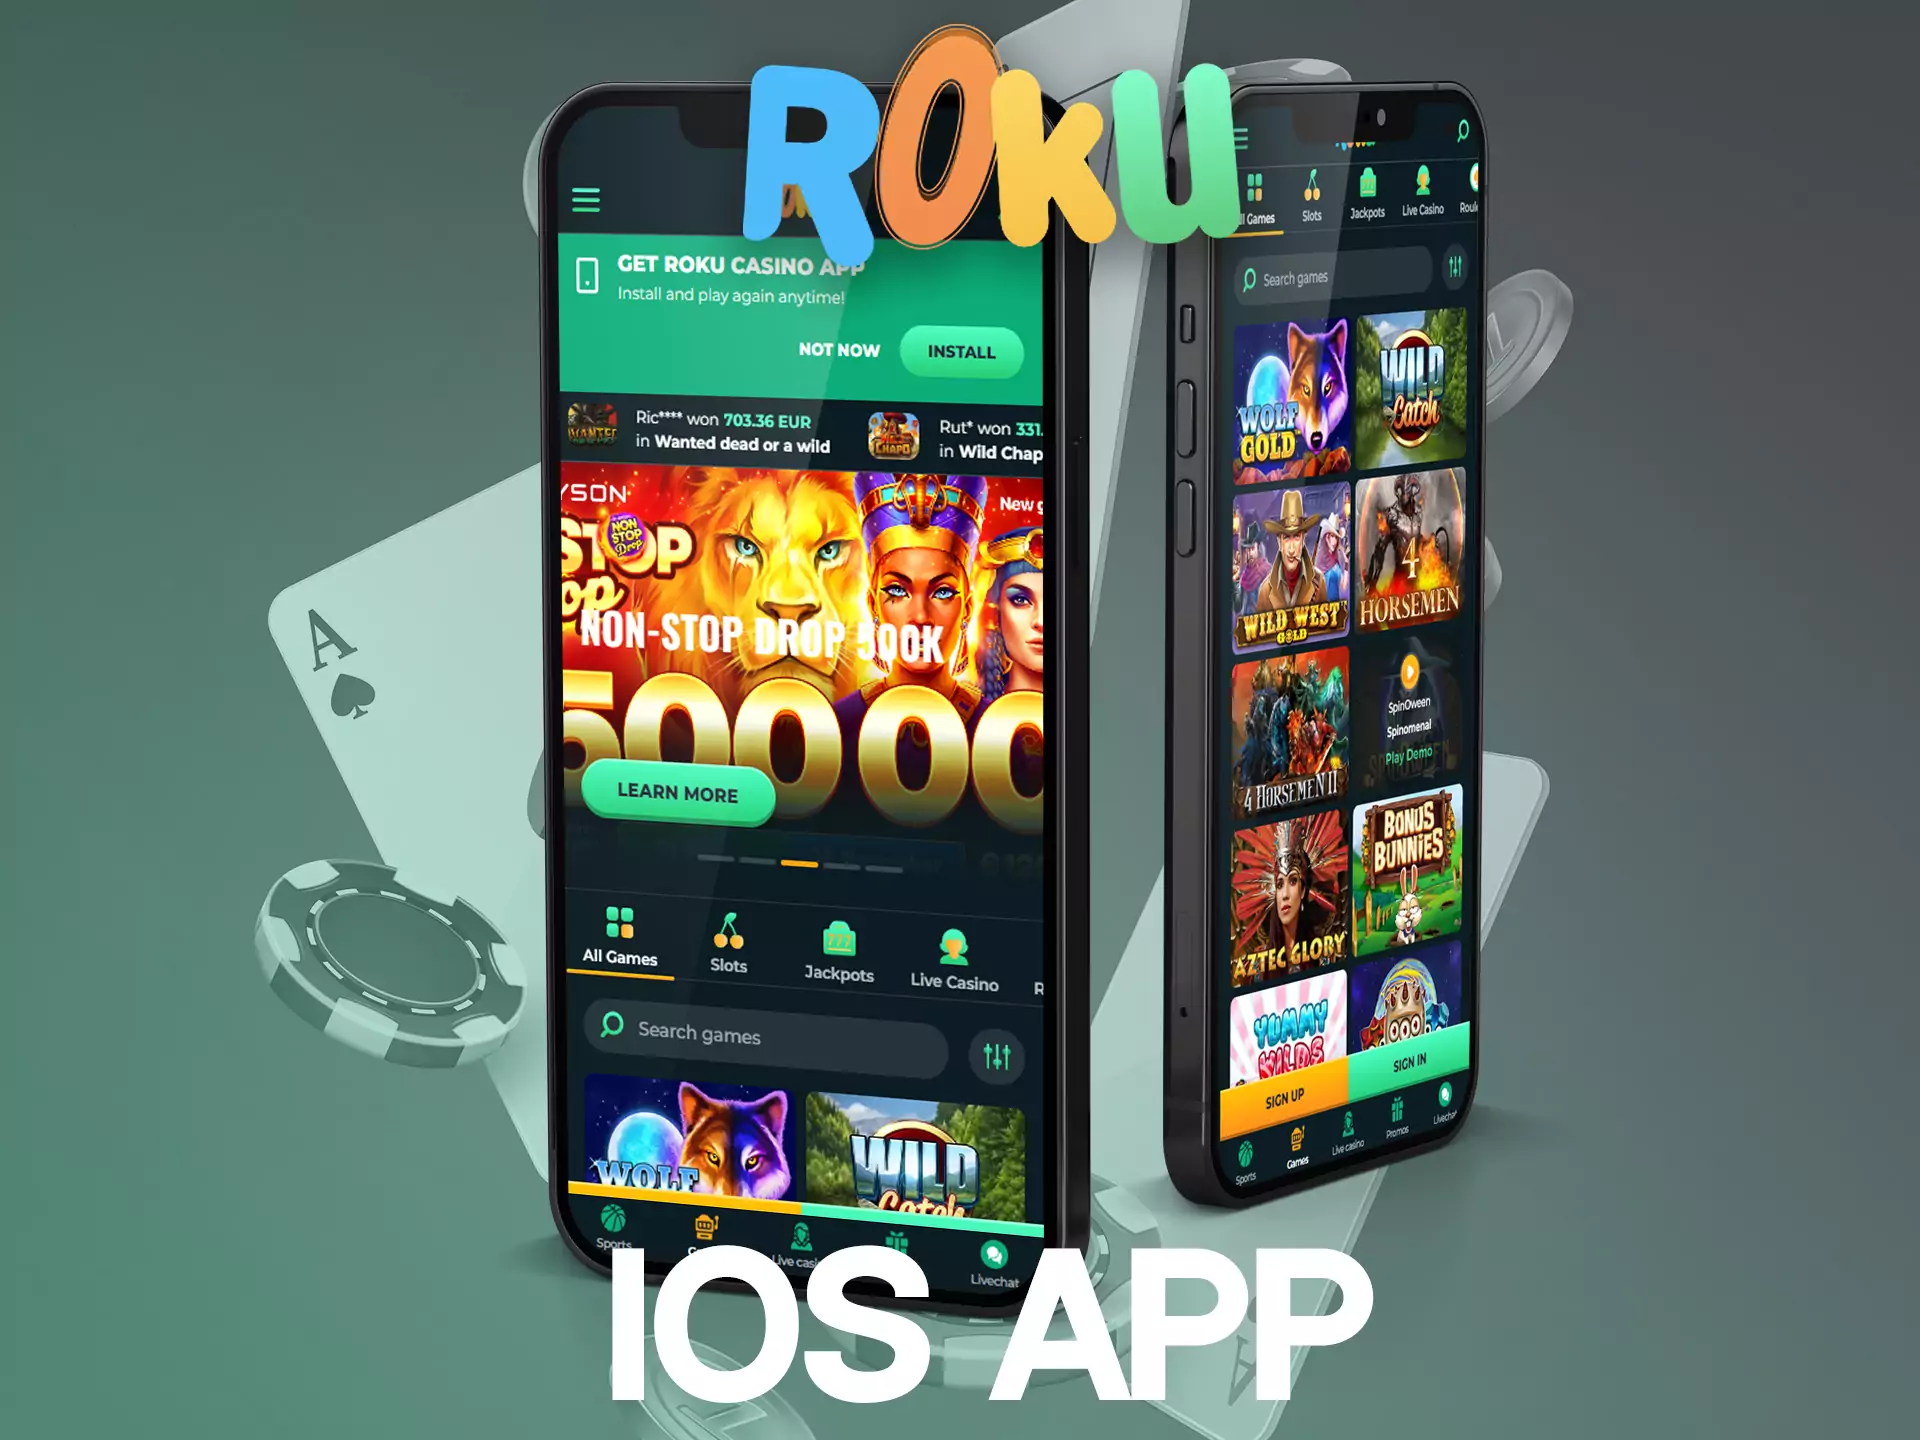 On iOS use the Rokubet mobile website.